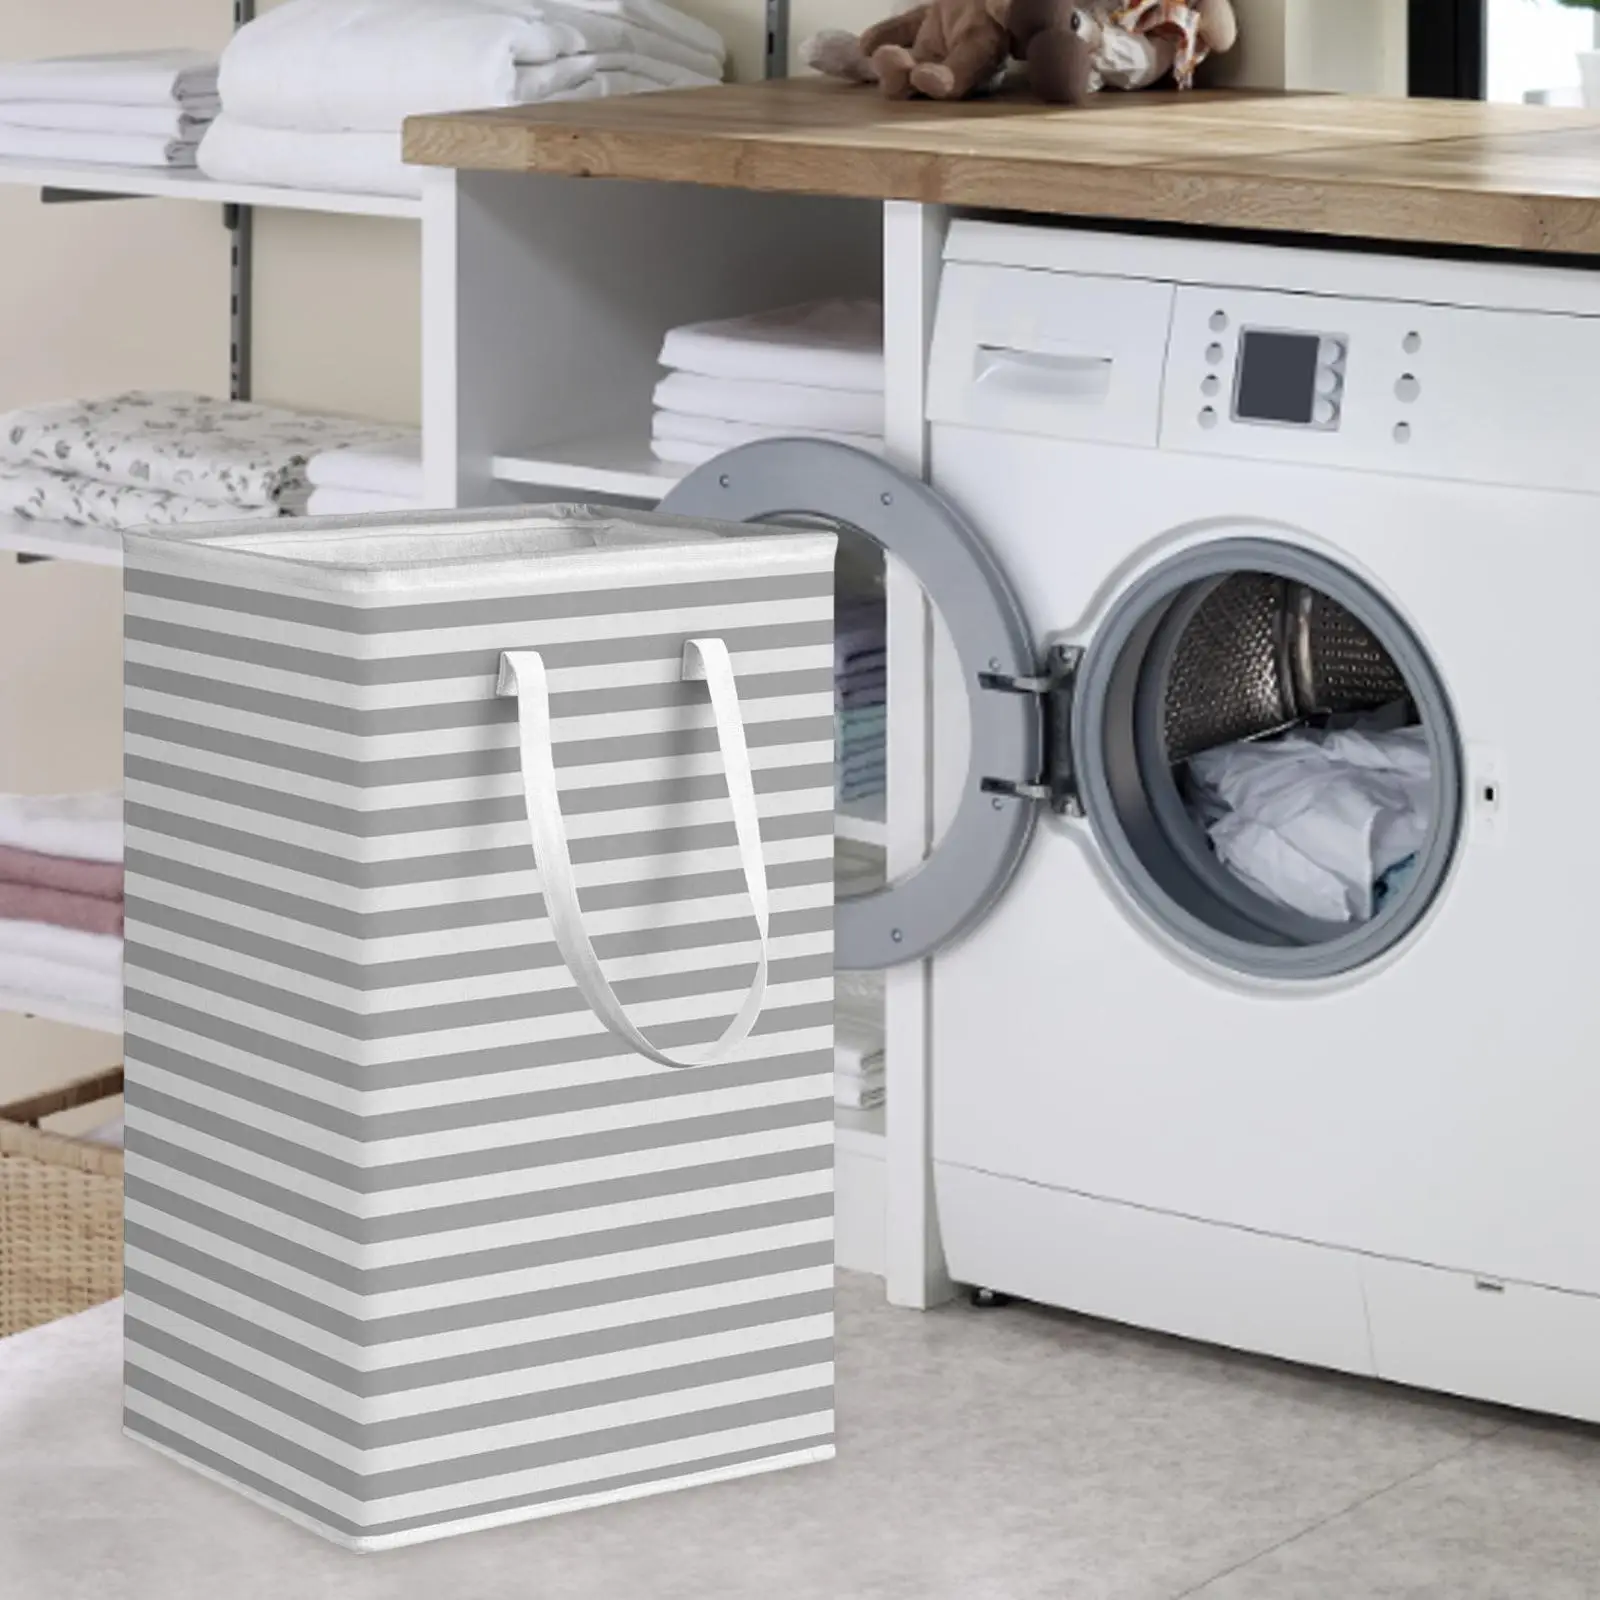 Waterproof Laundry Hamper with Handles Toys Clothes Organizer Washing Bin Clothes Hamper Storage Basket for Apartments Hotel